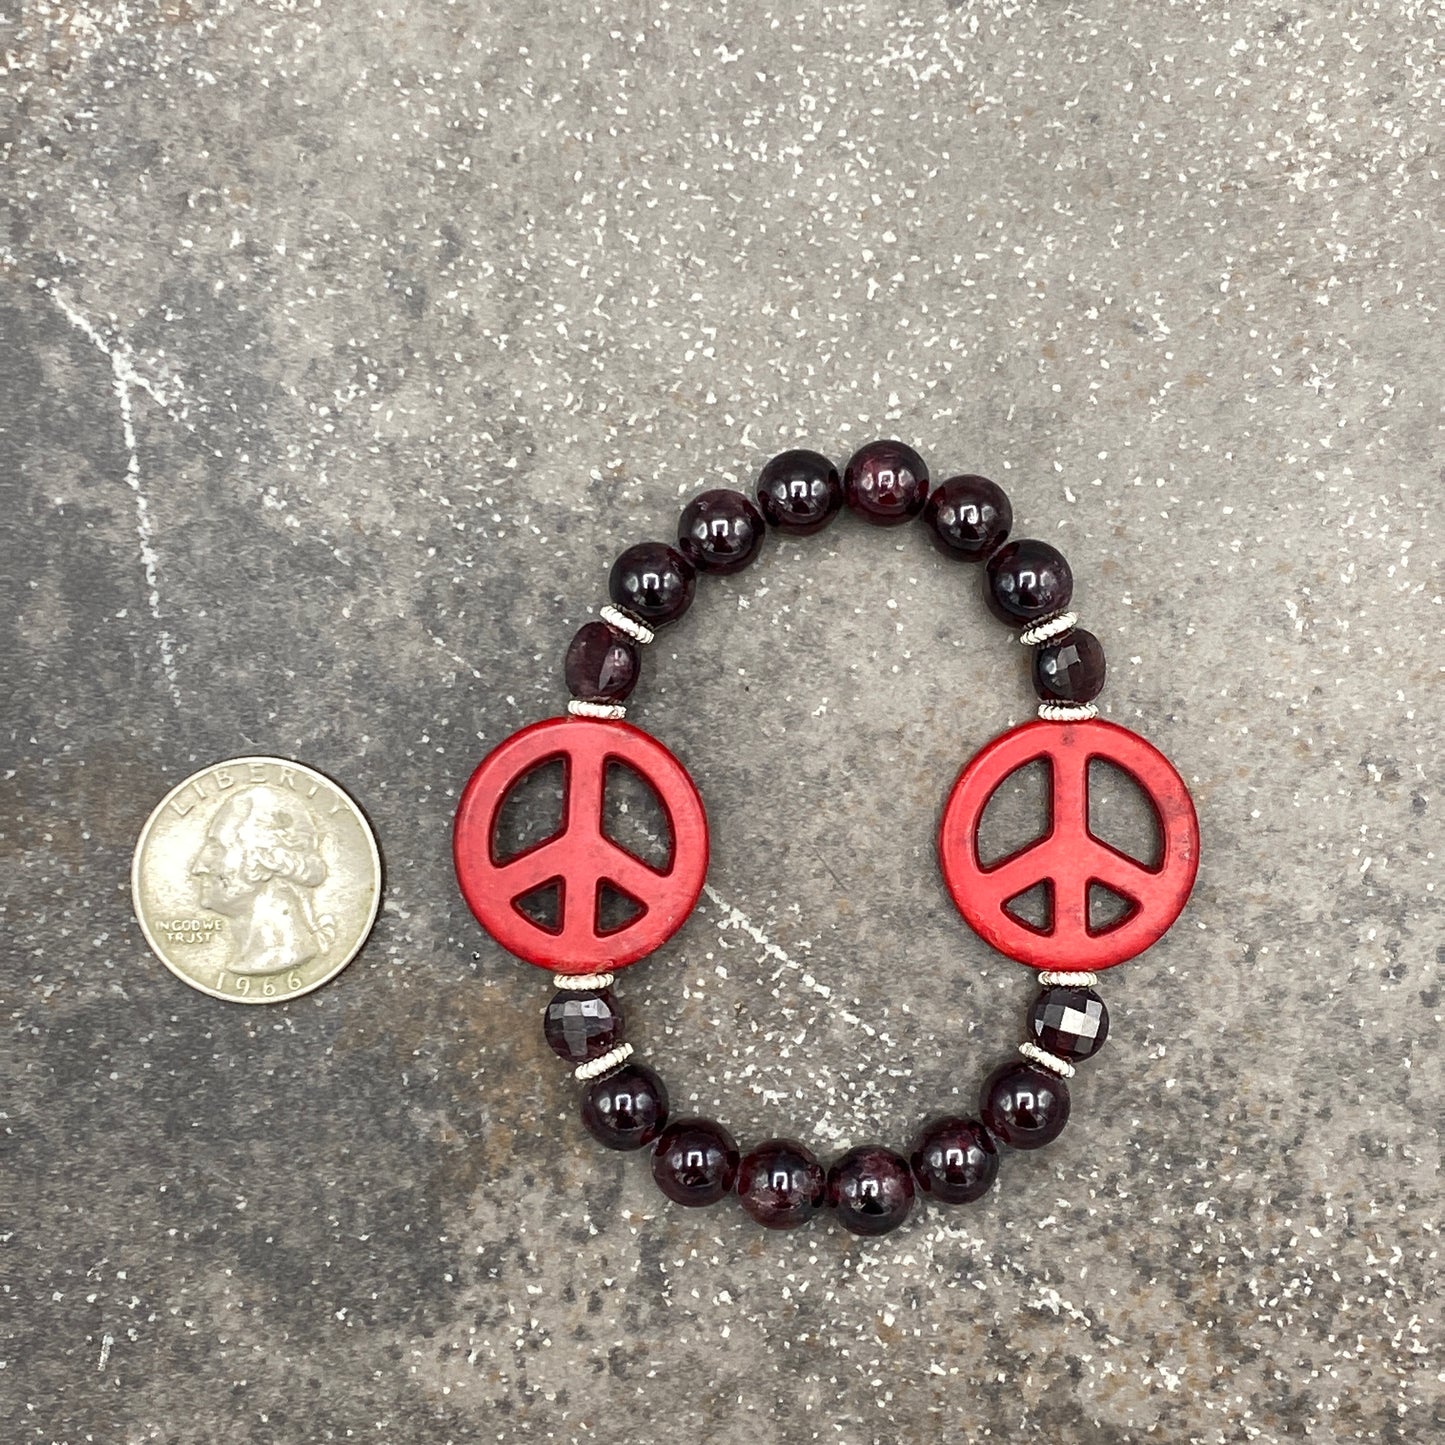 Gemstone Peace Bracelets with Sterling Silver accents